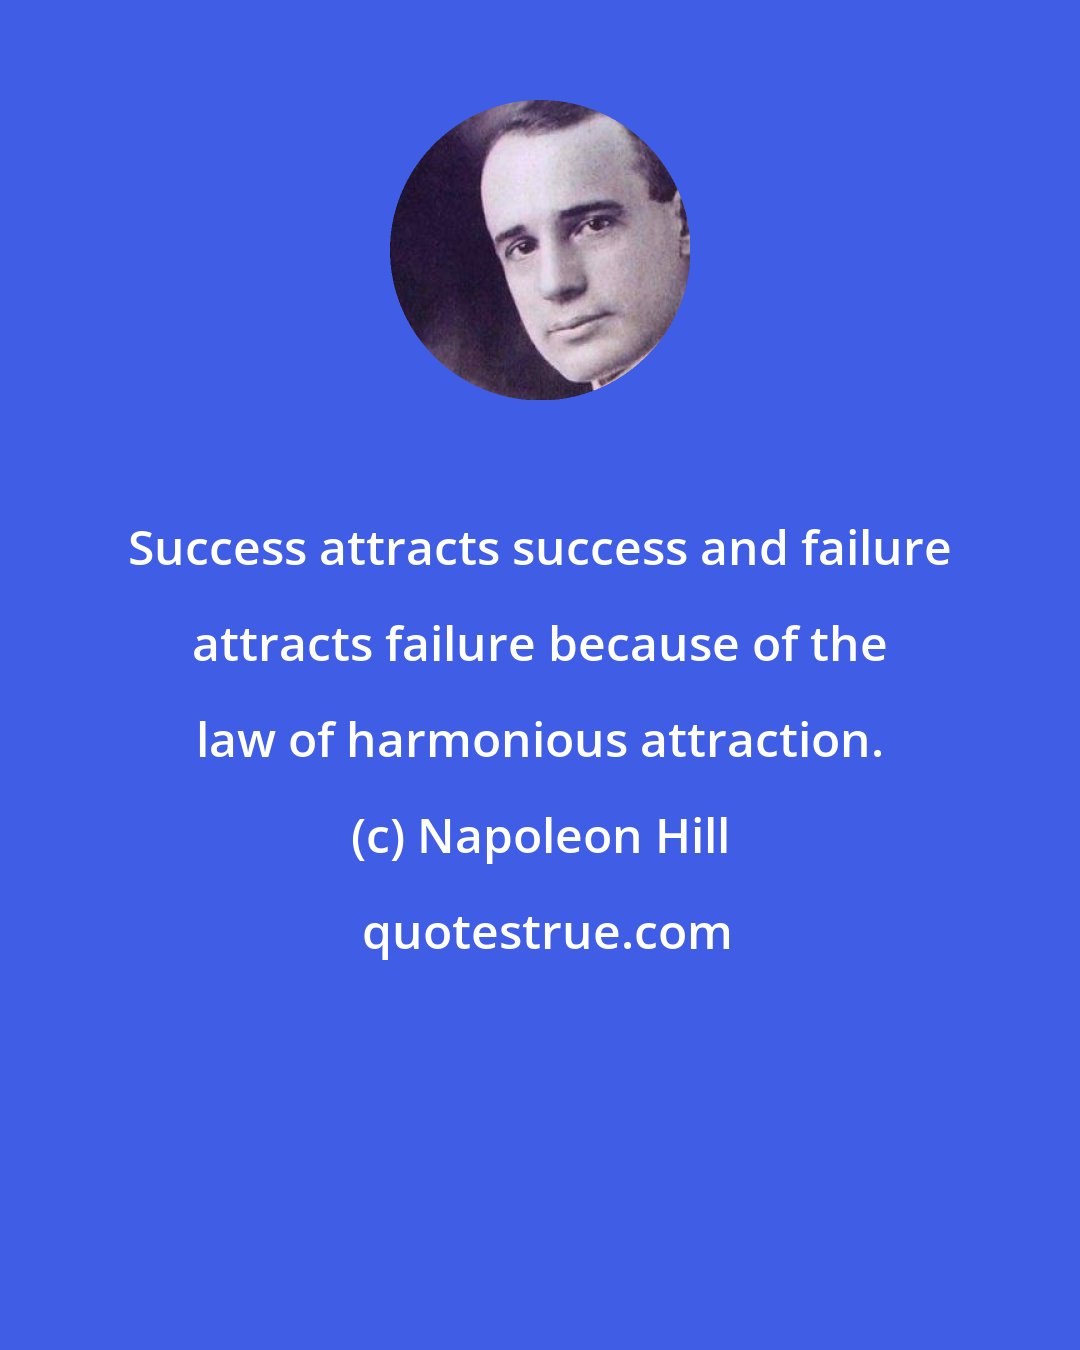 Napoleon Hill: Success attracts success and failure attracts failure because of the law of harmonious attraction.